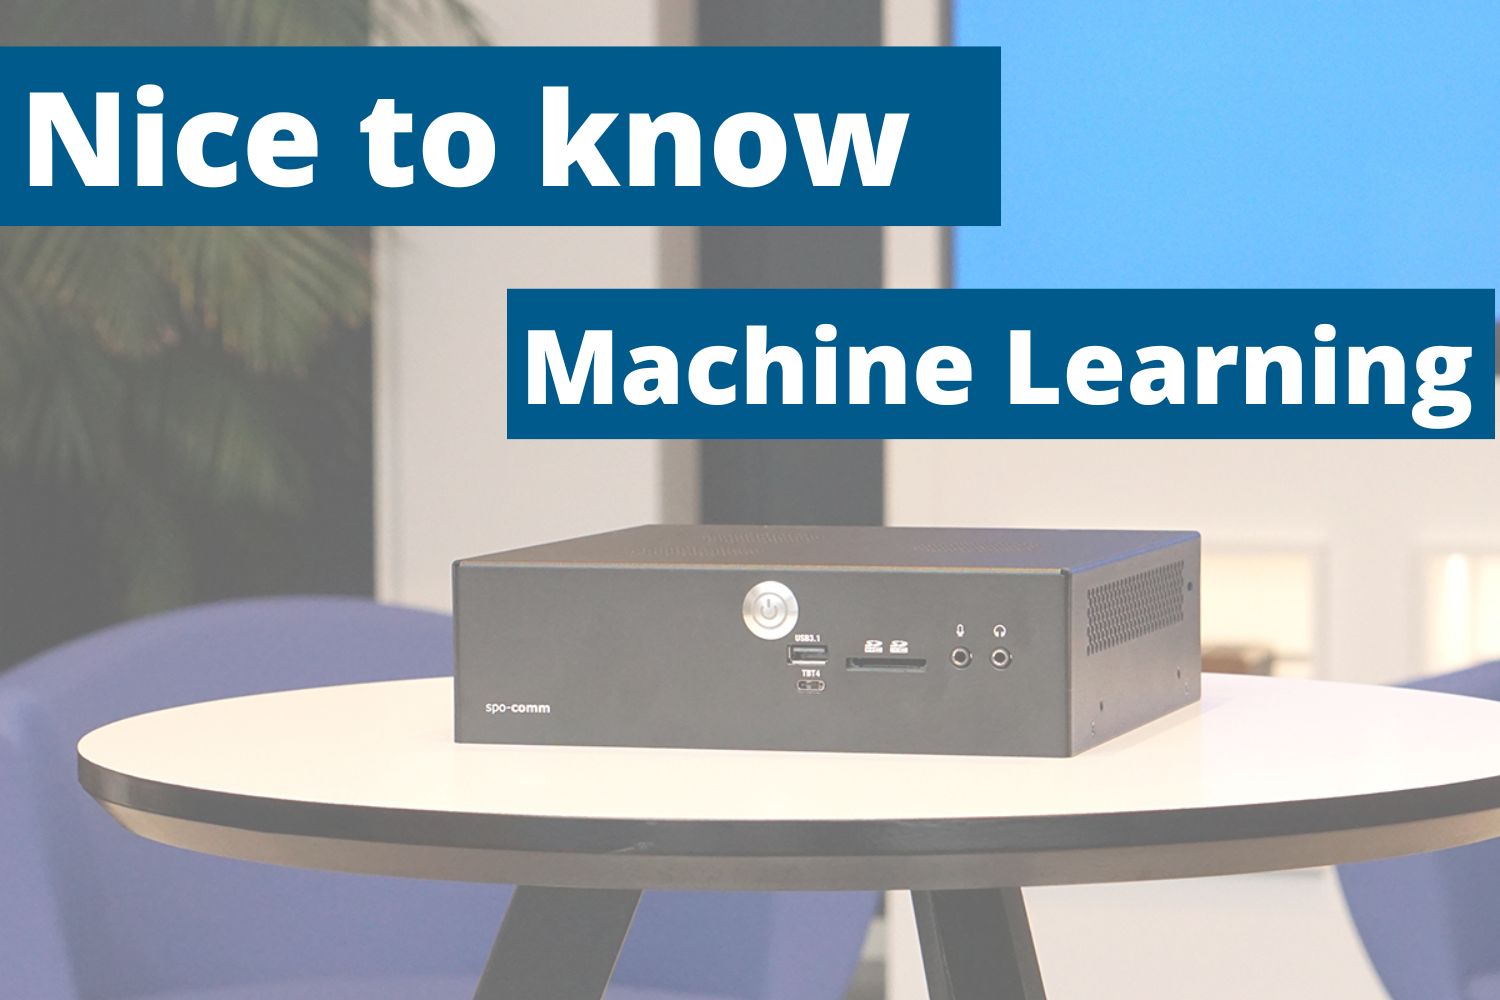 Nice to know: What is machine learning?